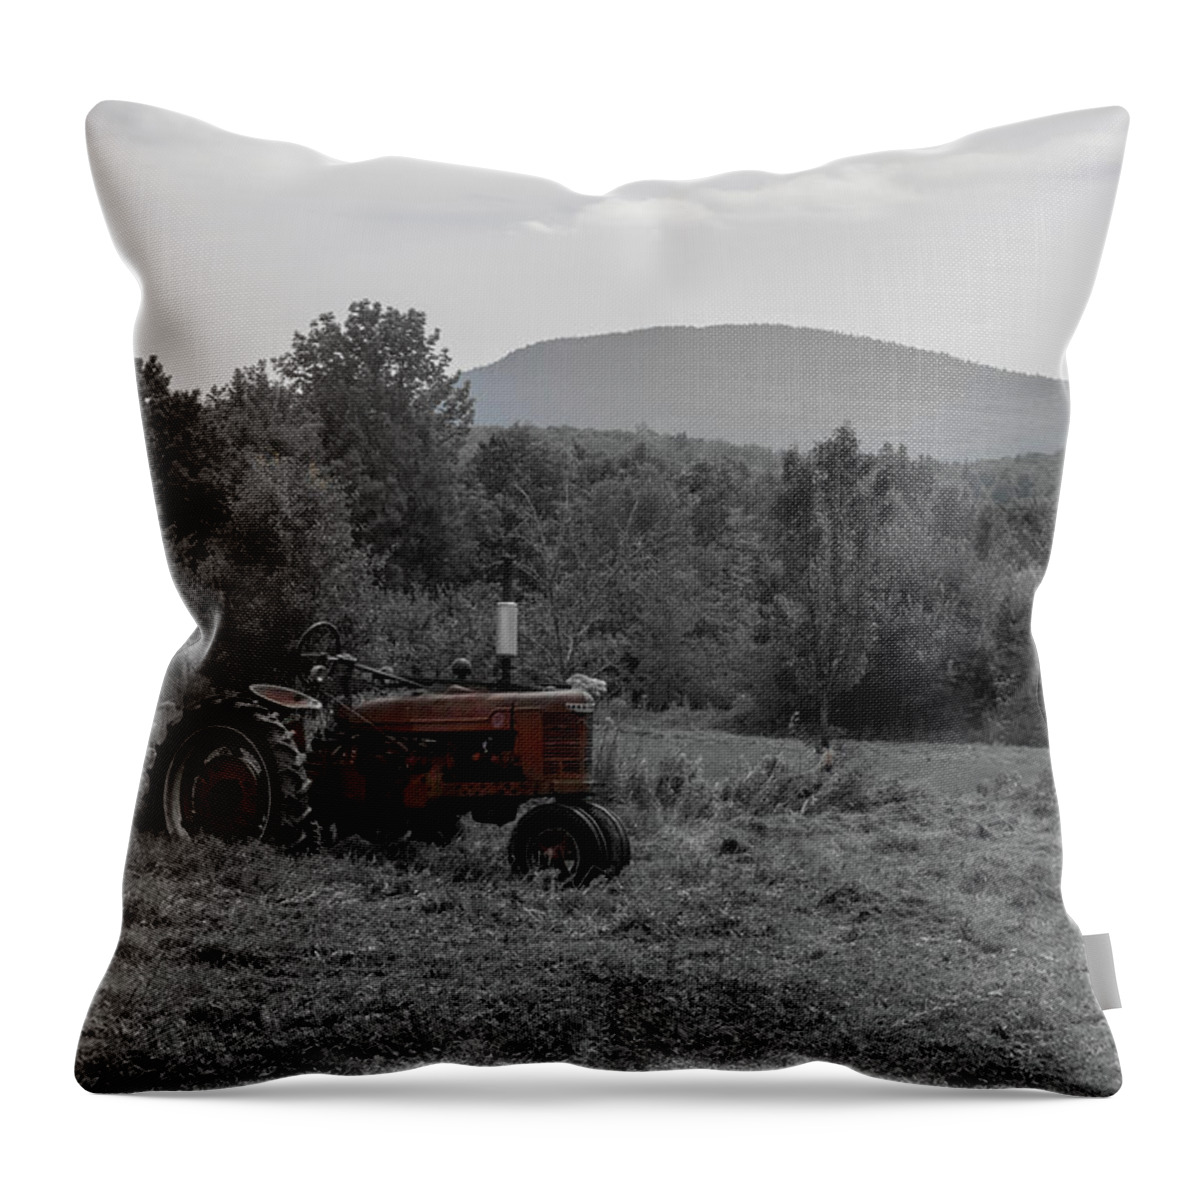 Farmall Throw Pillow featuring the photograph Farmall Tractor - Dedham Maine by Kirkodd Photography Of New England